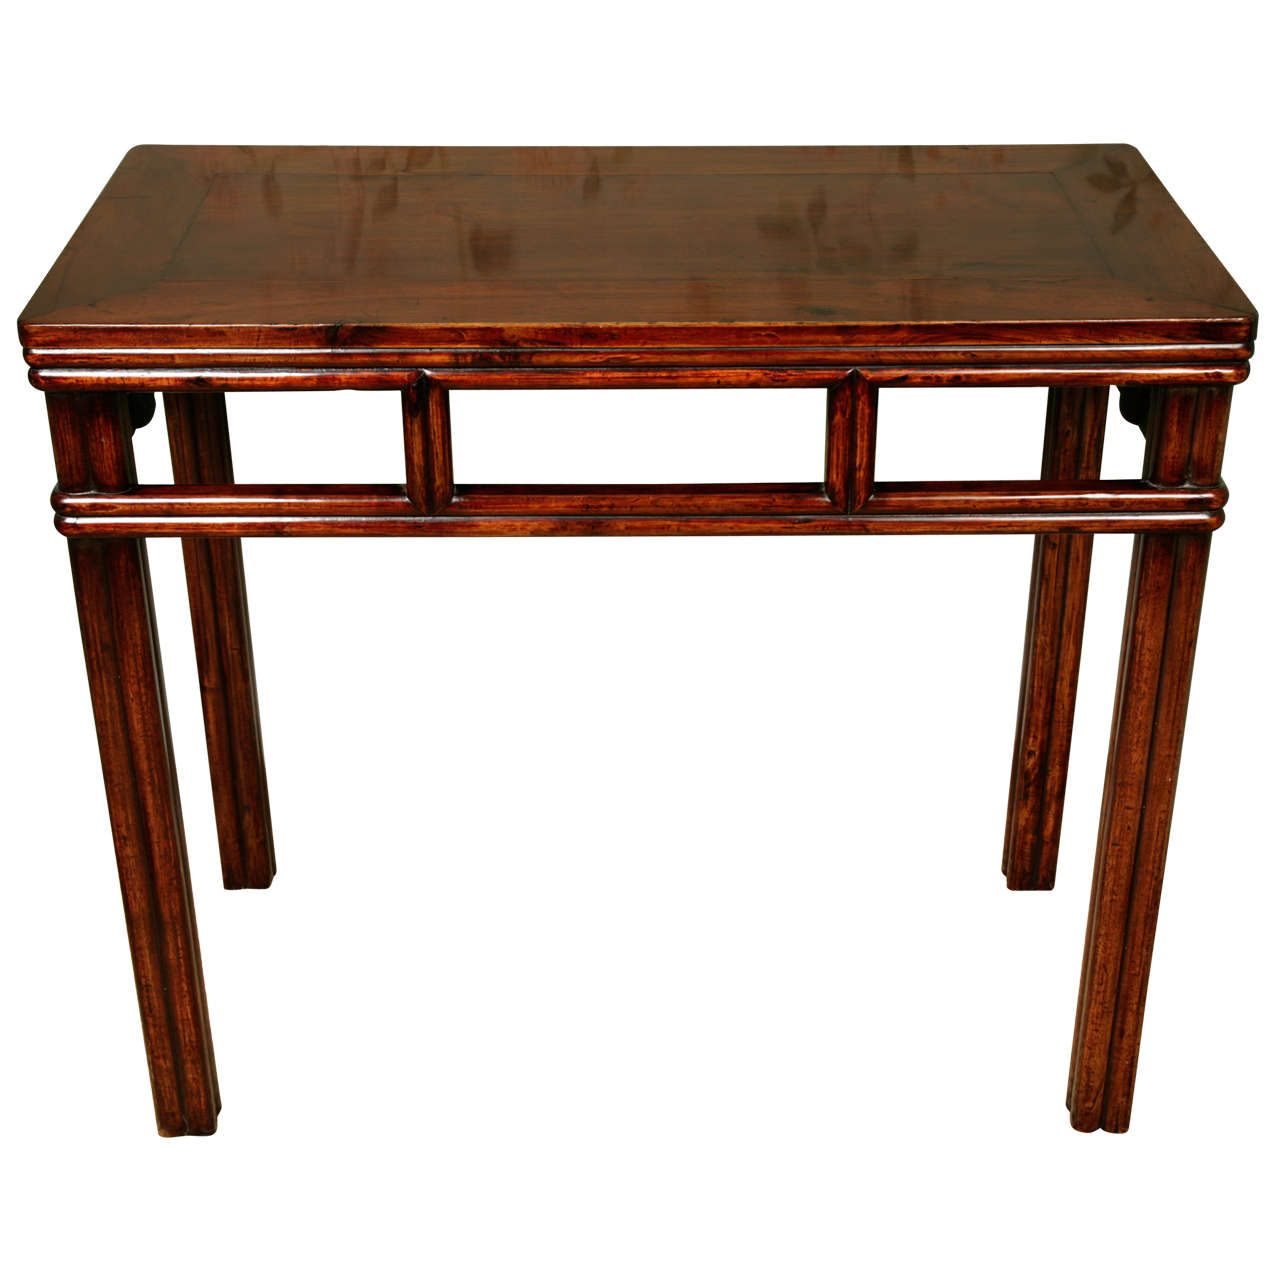 A Chinese 19th Century Huanghuali Wood Altar Table